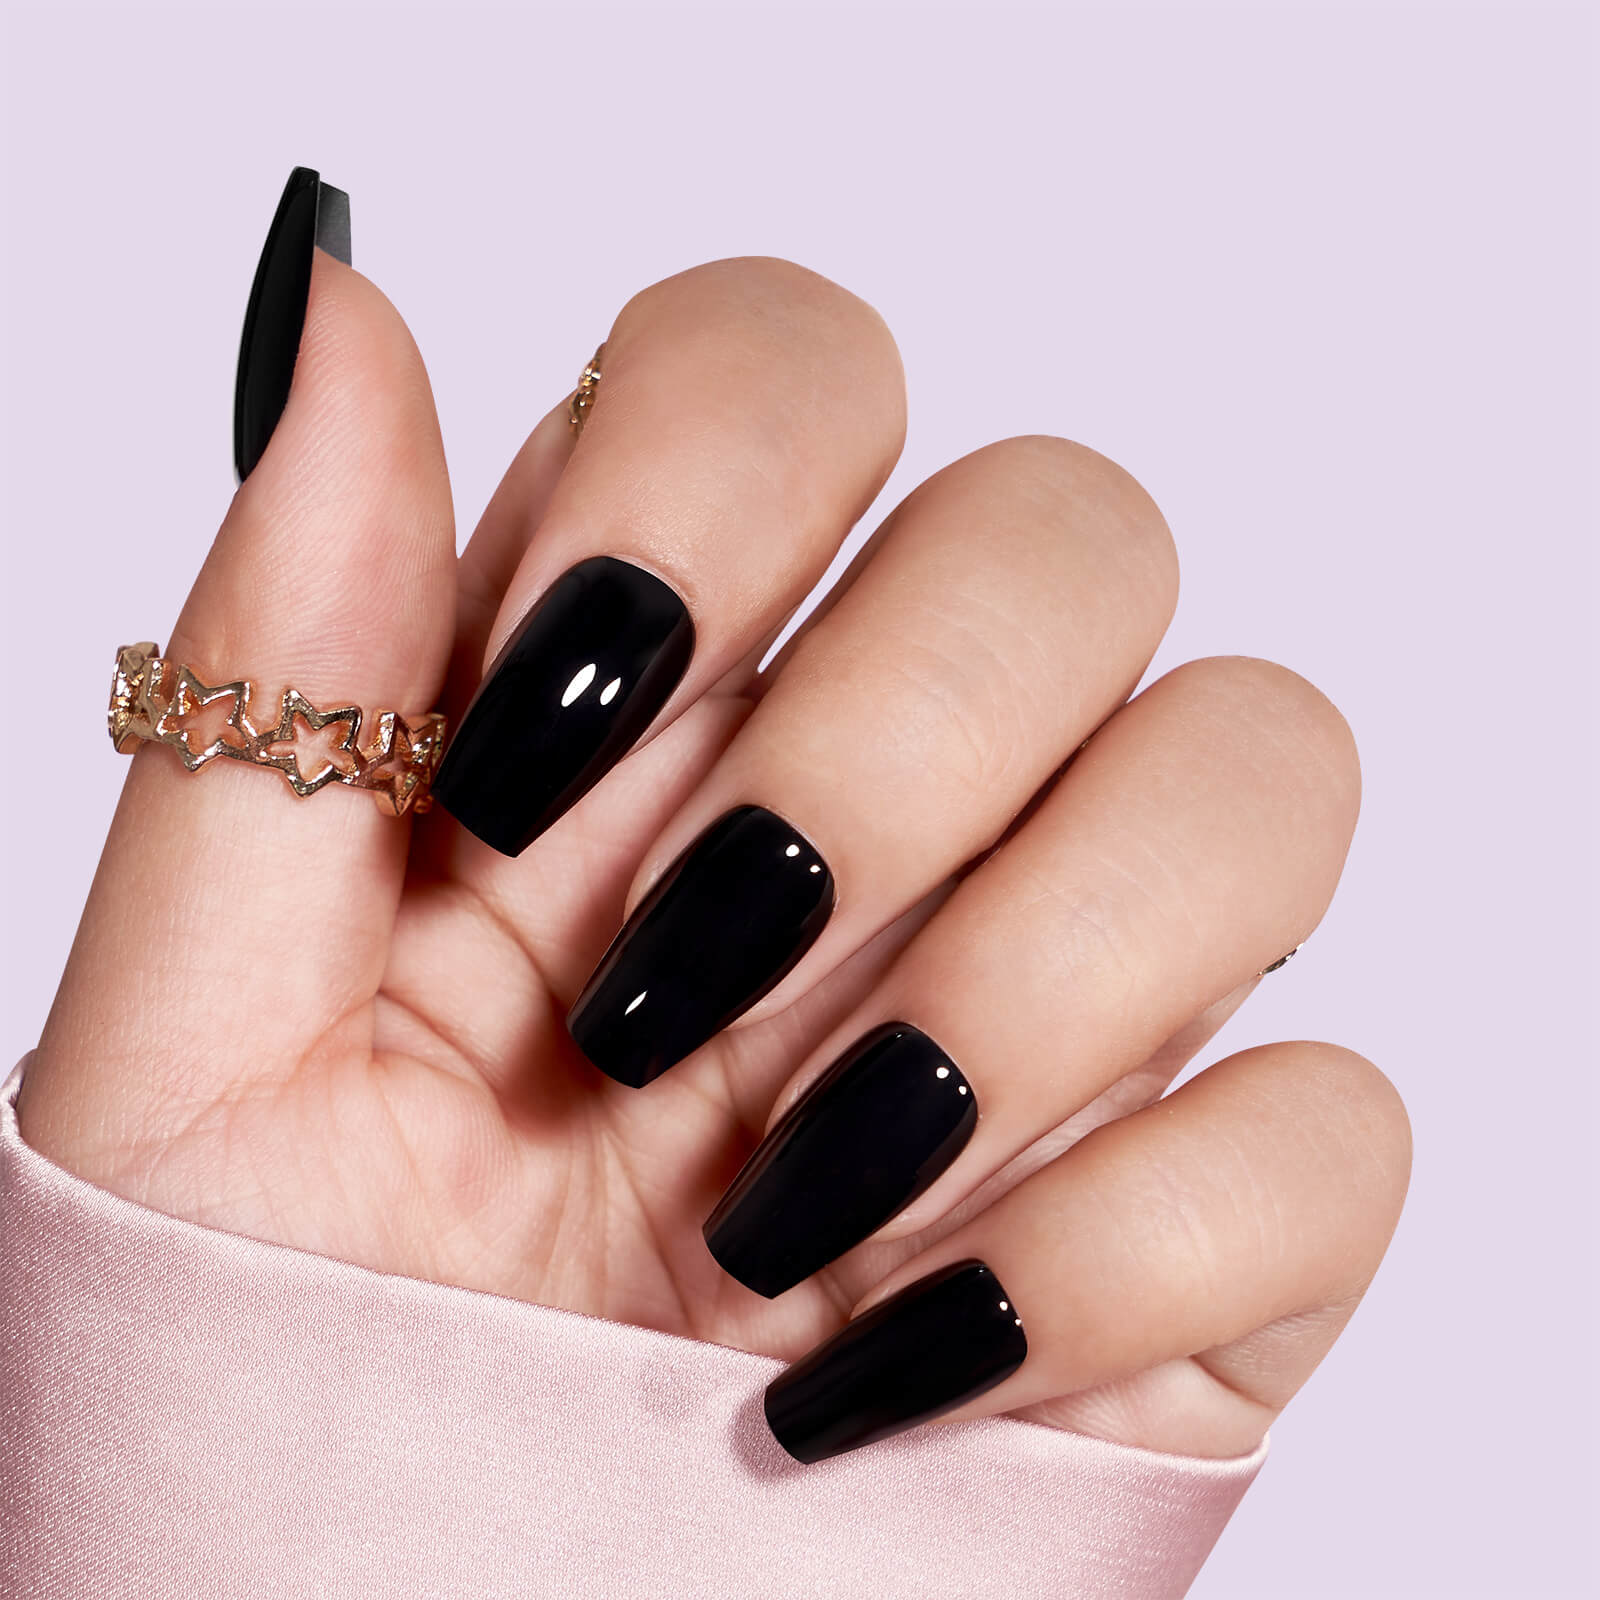 Pink And Black Nail Designs That Look Amazing - Booksy.com